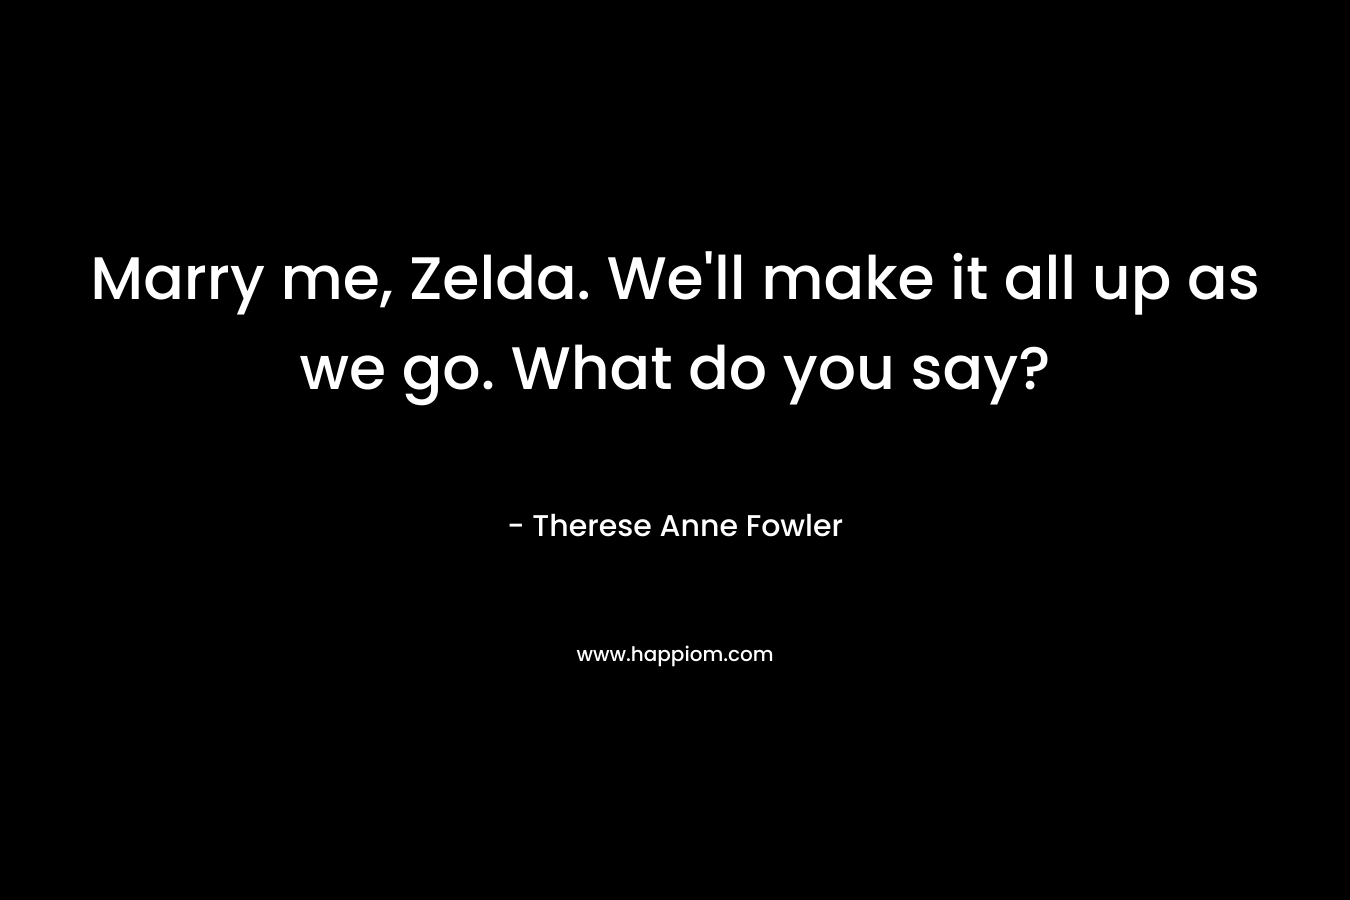 Marry me, Zelda. We’ll make it all up as we go. What do you say? – Therese Anne Fowler